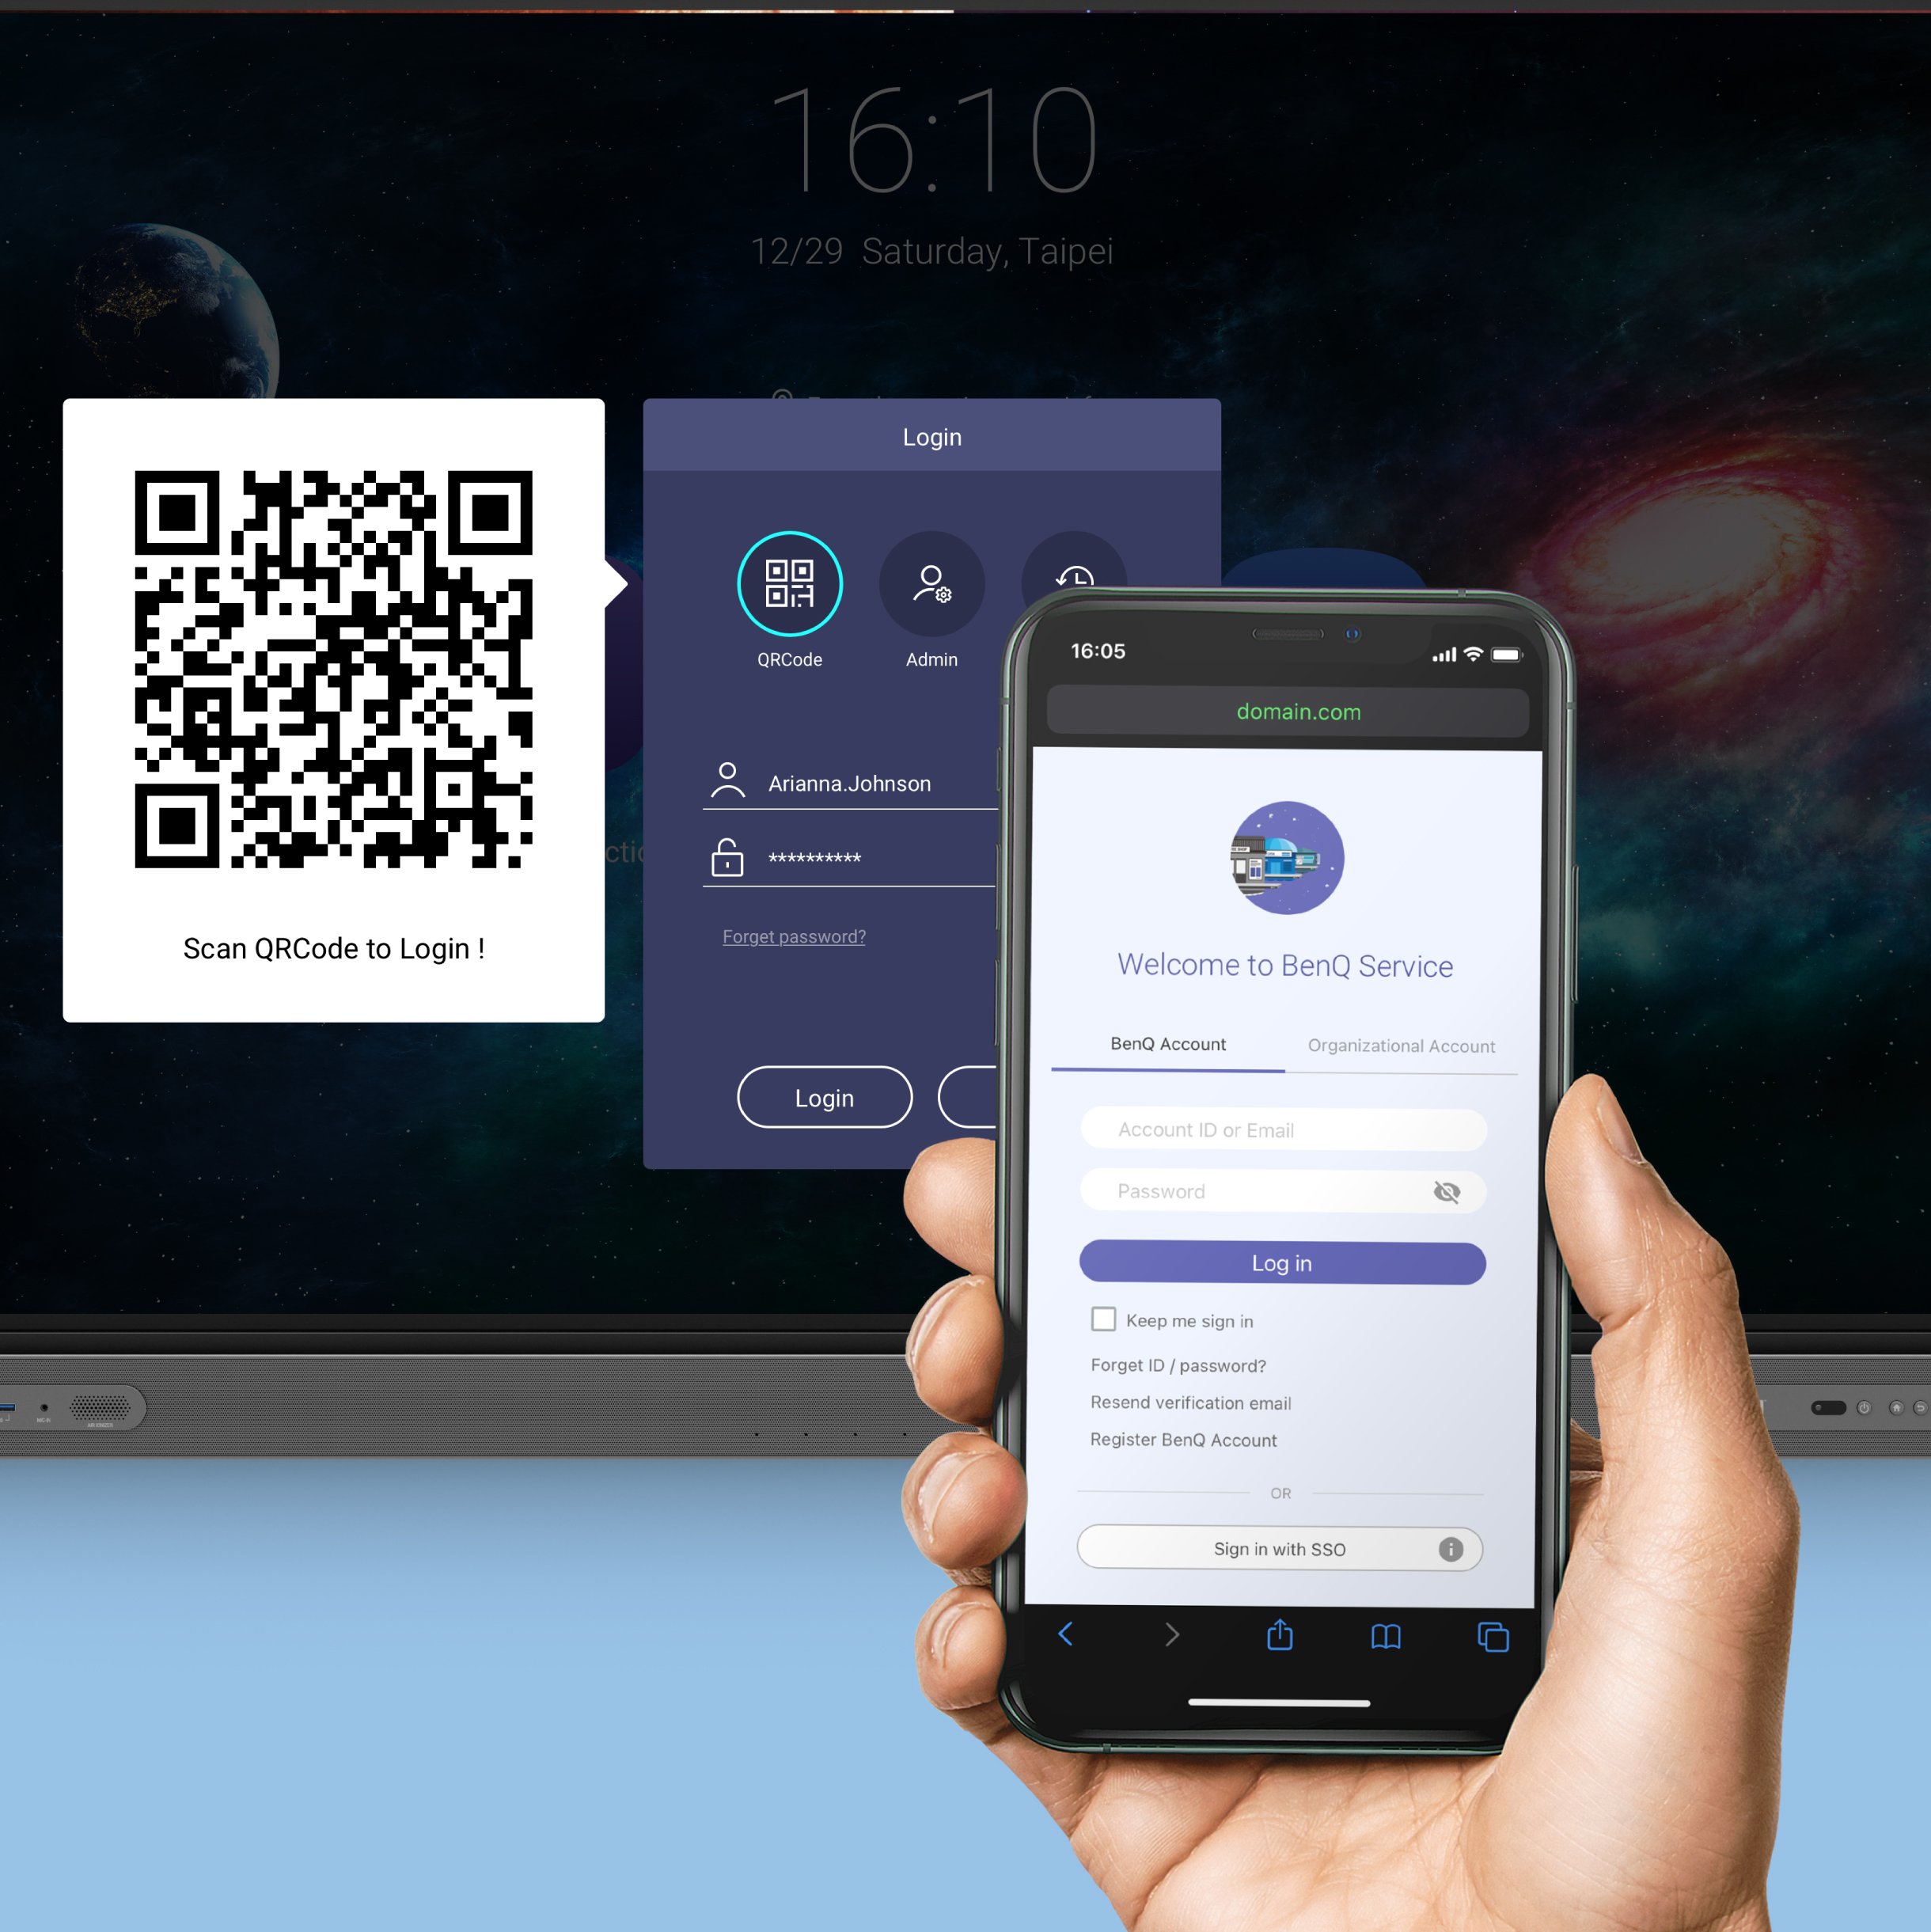 Log in by tapping NFC card or scanning a QR code